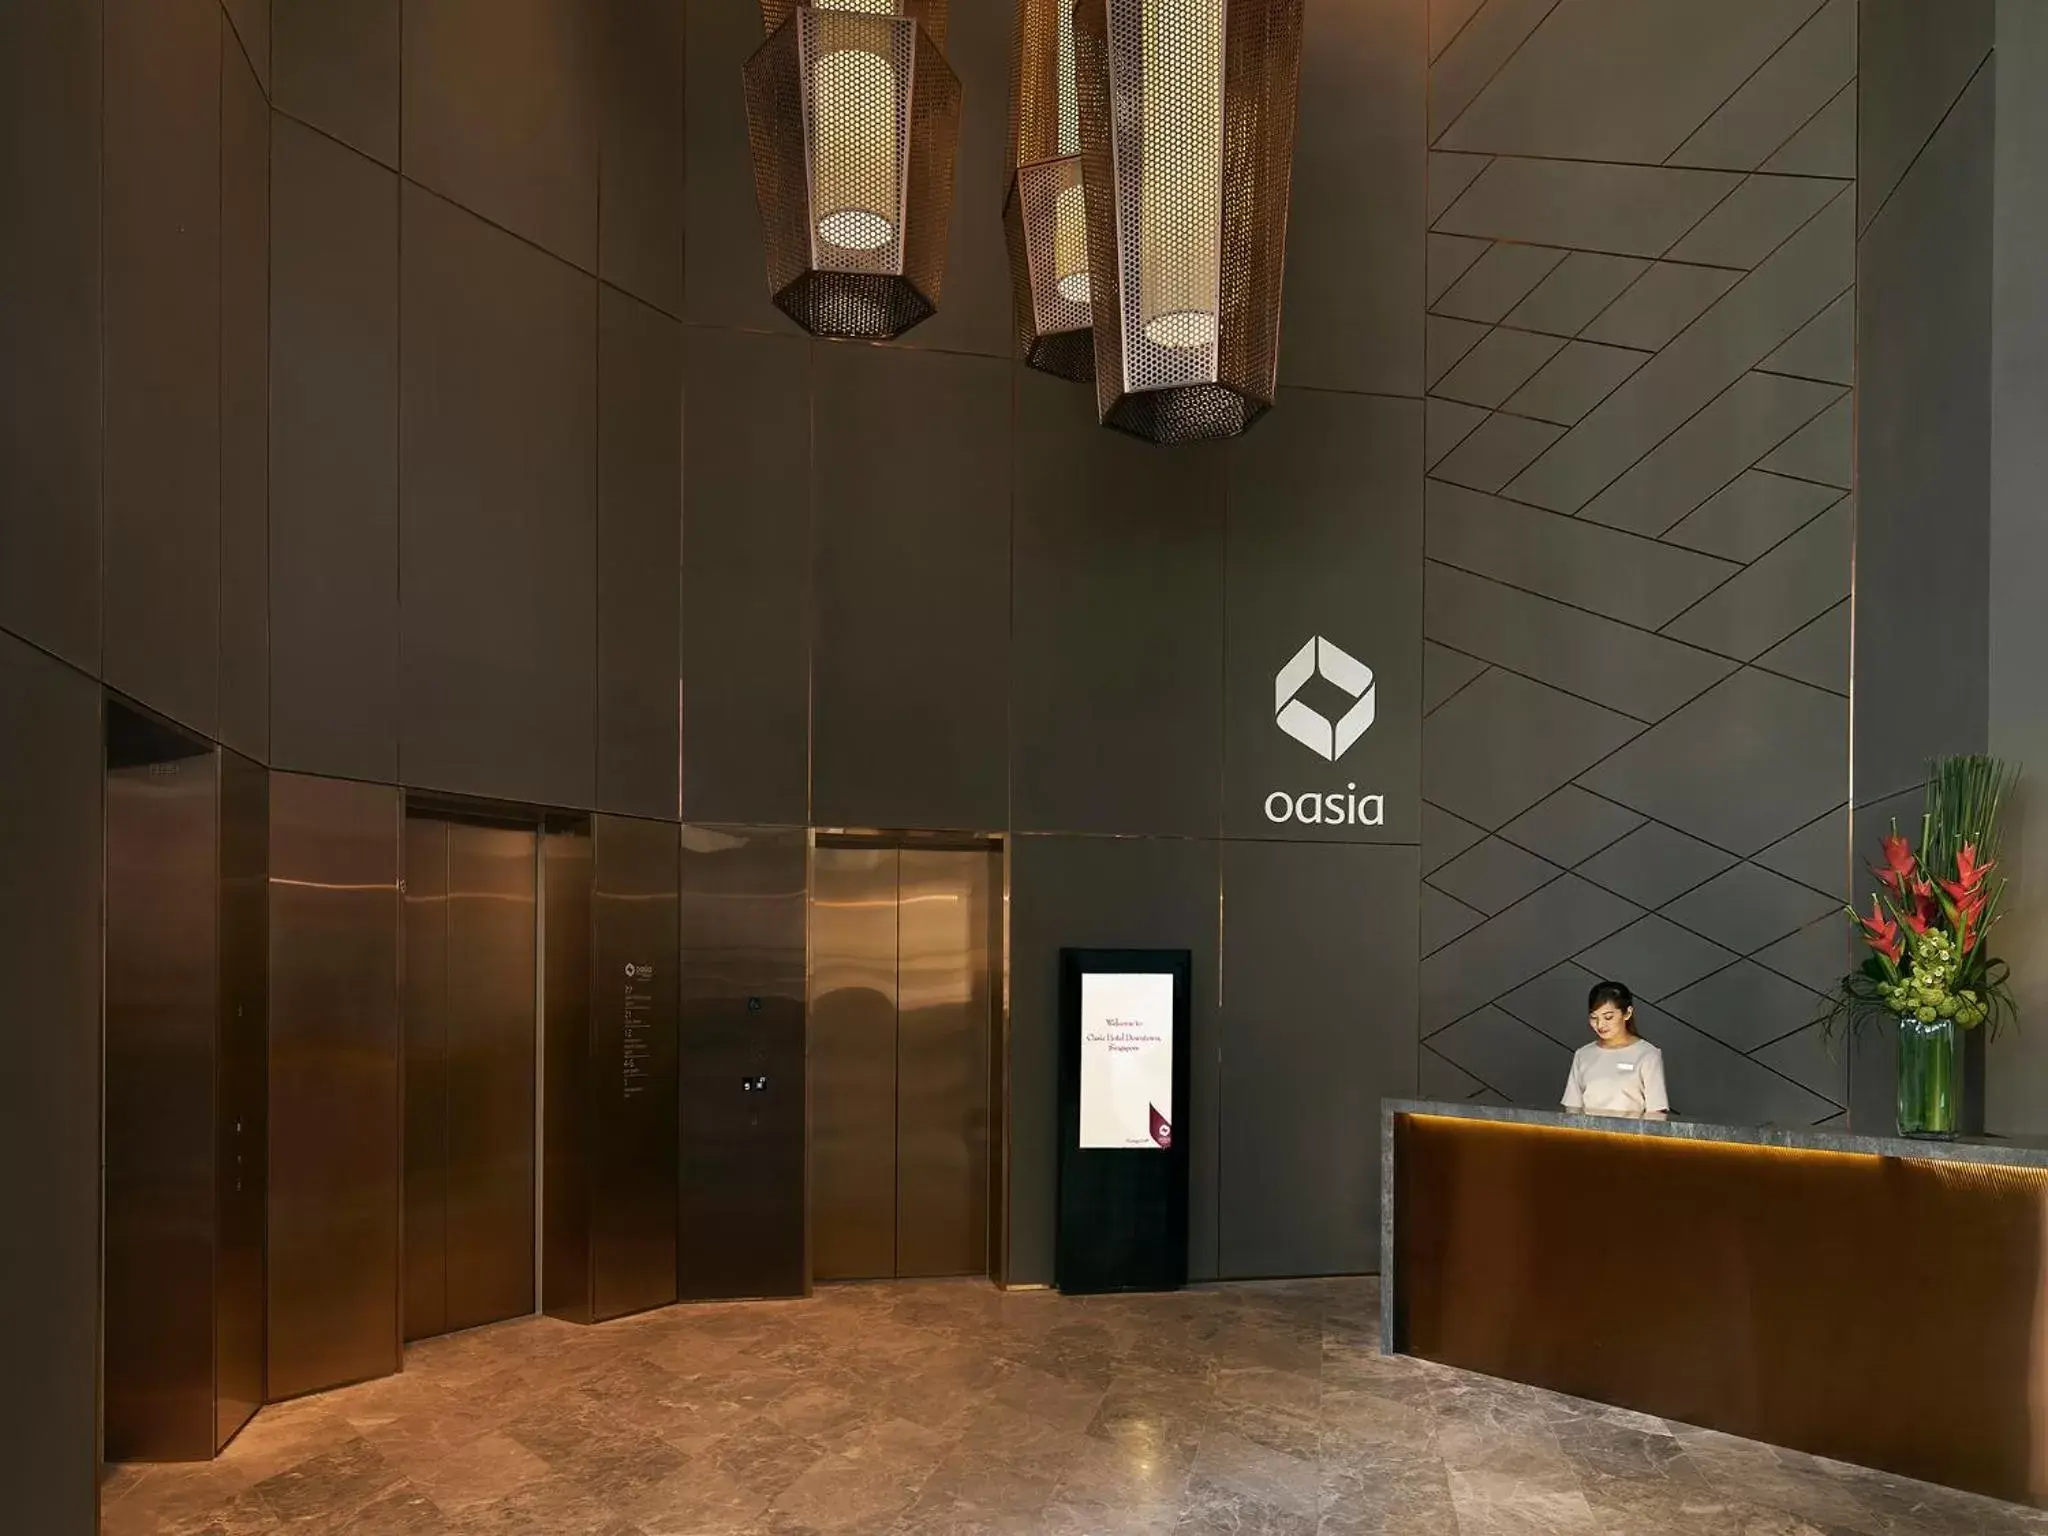 Facade/entrance in Oasia Hotel Downtown, Singapore by Far East Hospitality